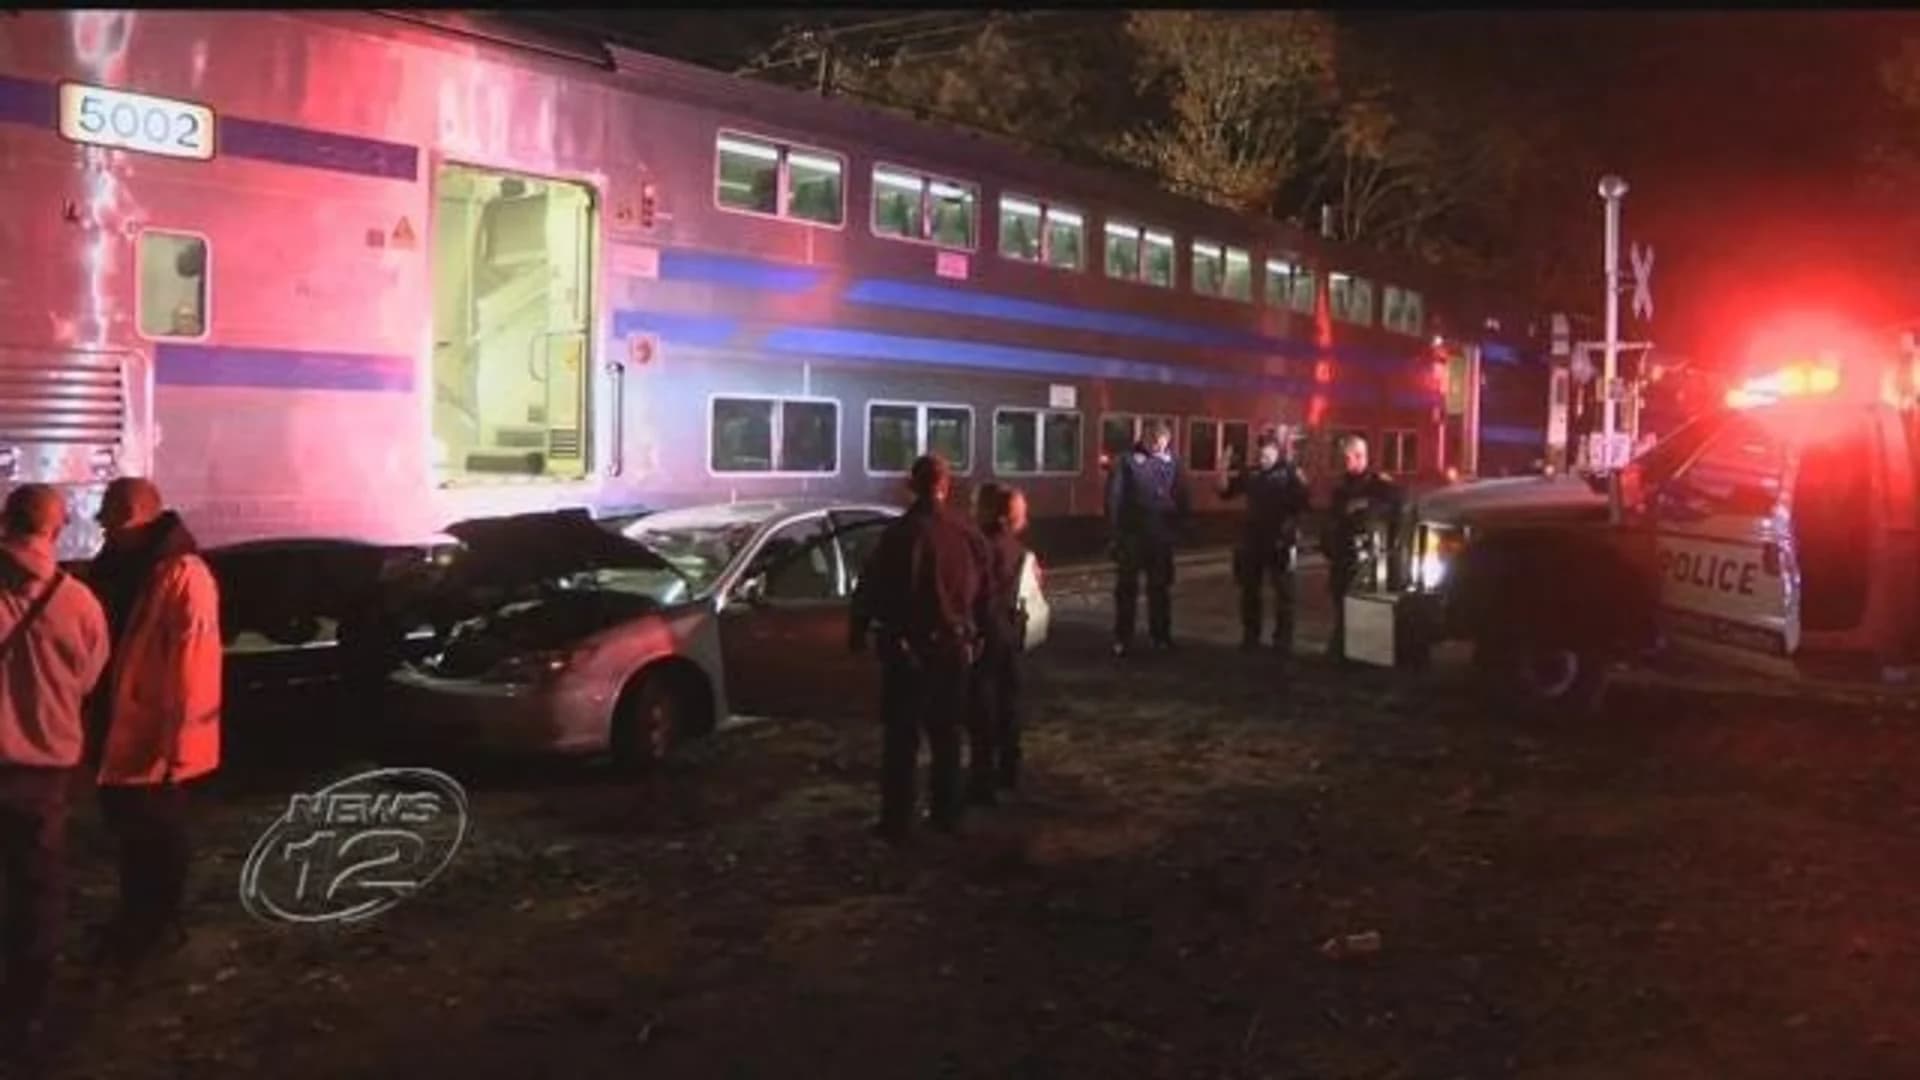 No injuries after LIRR train hits vehicle on tracks in Holtsville